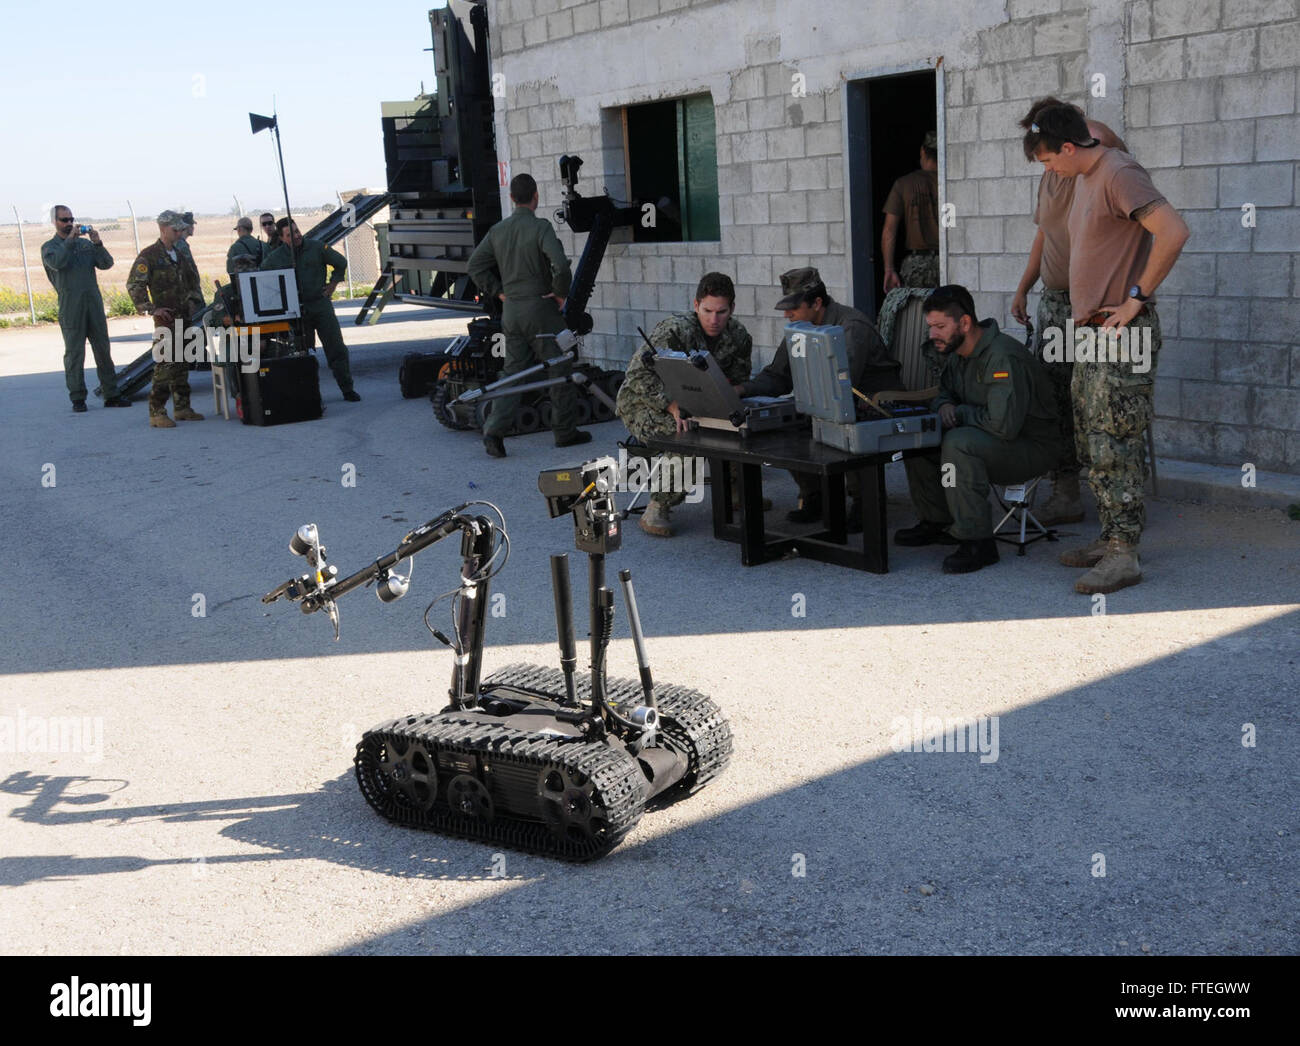 NAVAL STATION ROTA, Spain (Oct. 7, 2014) – U.S. Navy Sailors from Explosive Ordnance Disposable Mobile Unit (EODMU) 8 Detachment Europe, Spanish Marines, and Italian Navy 1st Regiment San Marco work in tandem to operate a talon robot as part of the 2014 Cadizex Exercise held at the simulated urban terrain compound Hogan's Alley aboard Naval Station Rota.. Spanish Marines Brimar from San Fernando, Spain, U.S. Navy Sailors, and Italian navy 1st Regiment San Marco from Venice, Italy worked in tandem during the trilateral exercise meant to strengthen bonds between NATO allies an Stock Photo